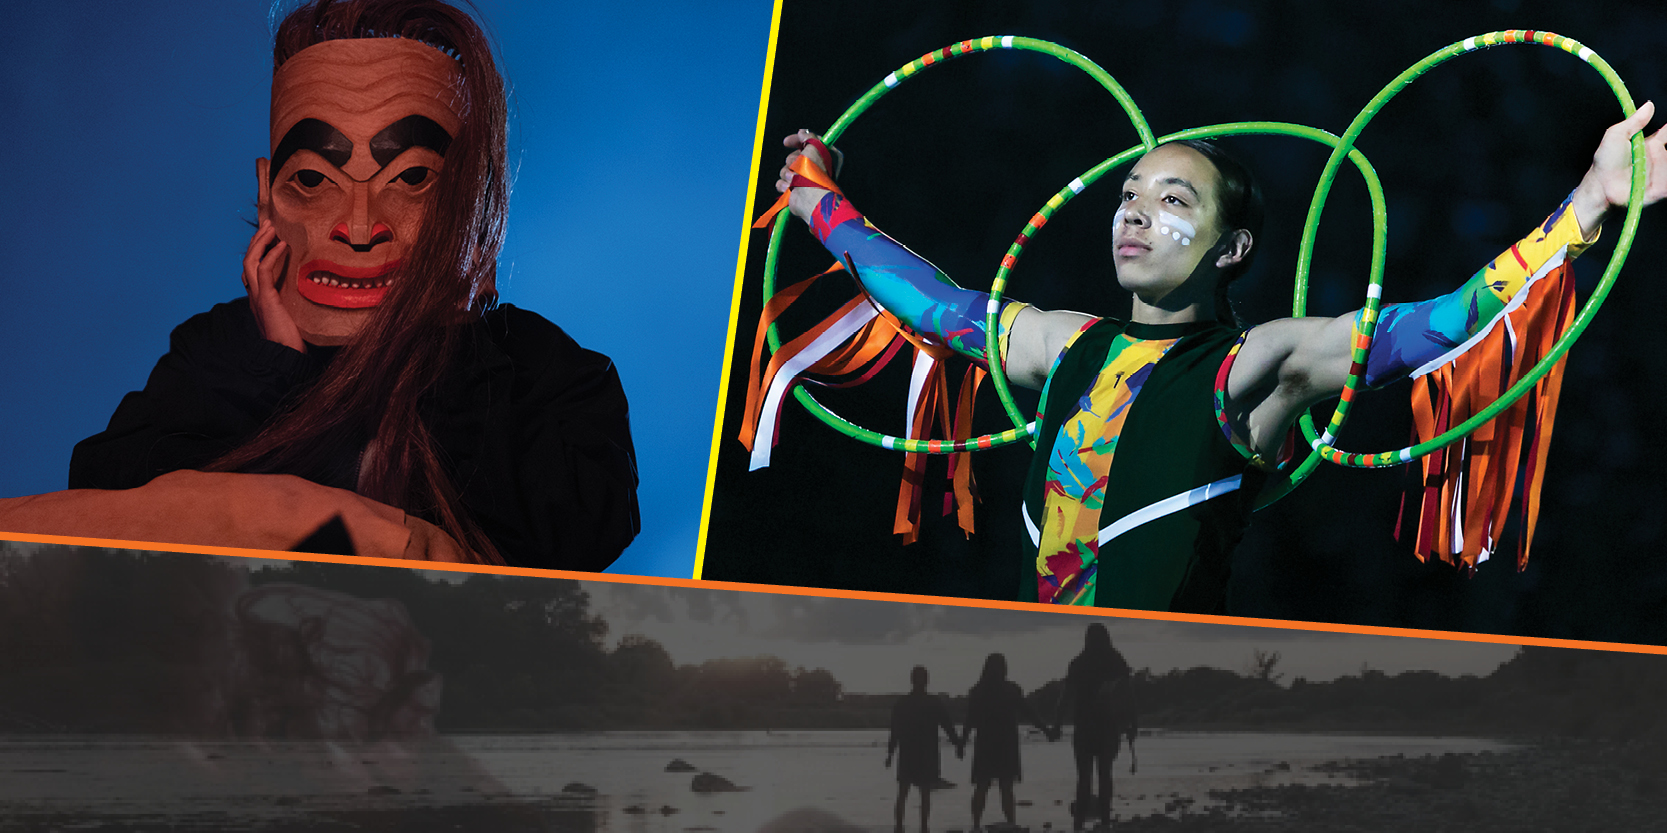 Variety of images related to the Indigenous event